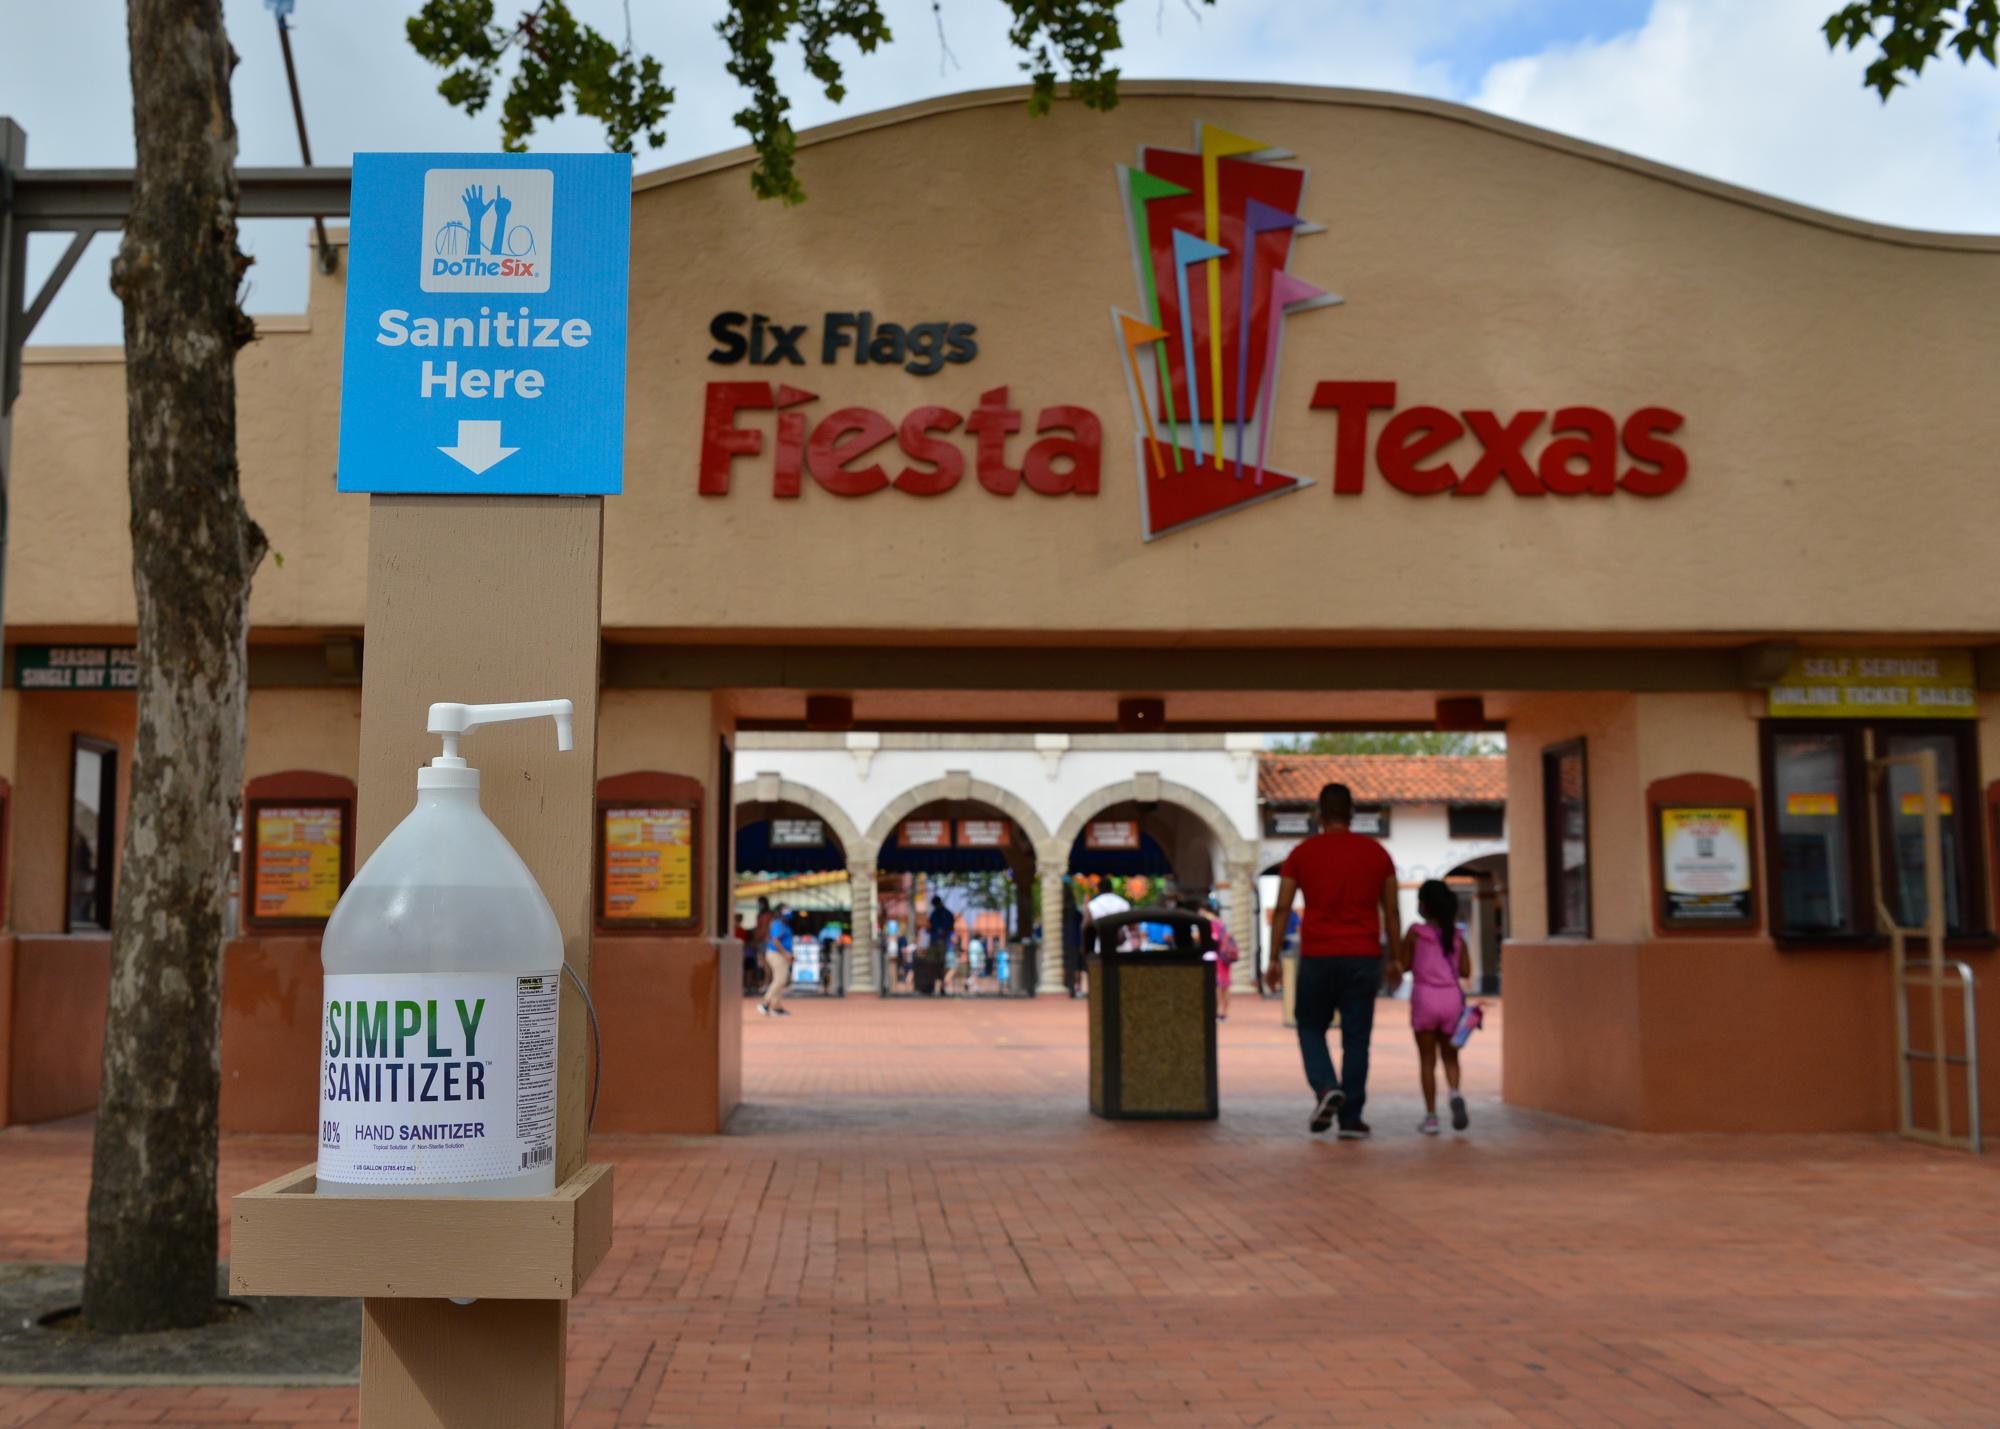 Autistic high school student alleges Six Flag Fiesta Texas co-worker  sexually assaulted her